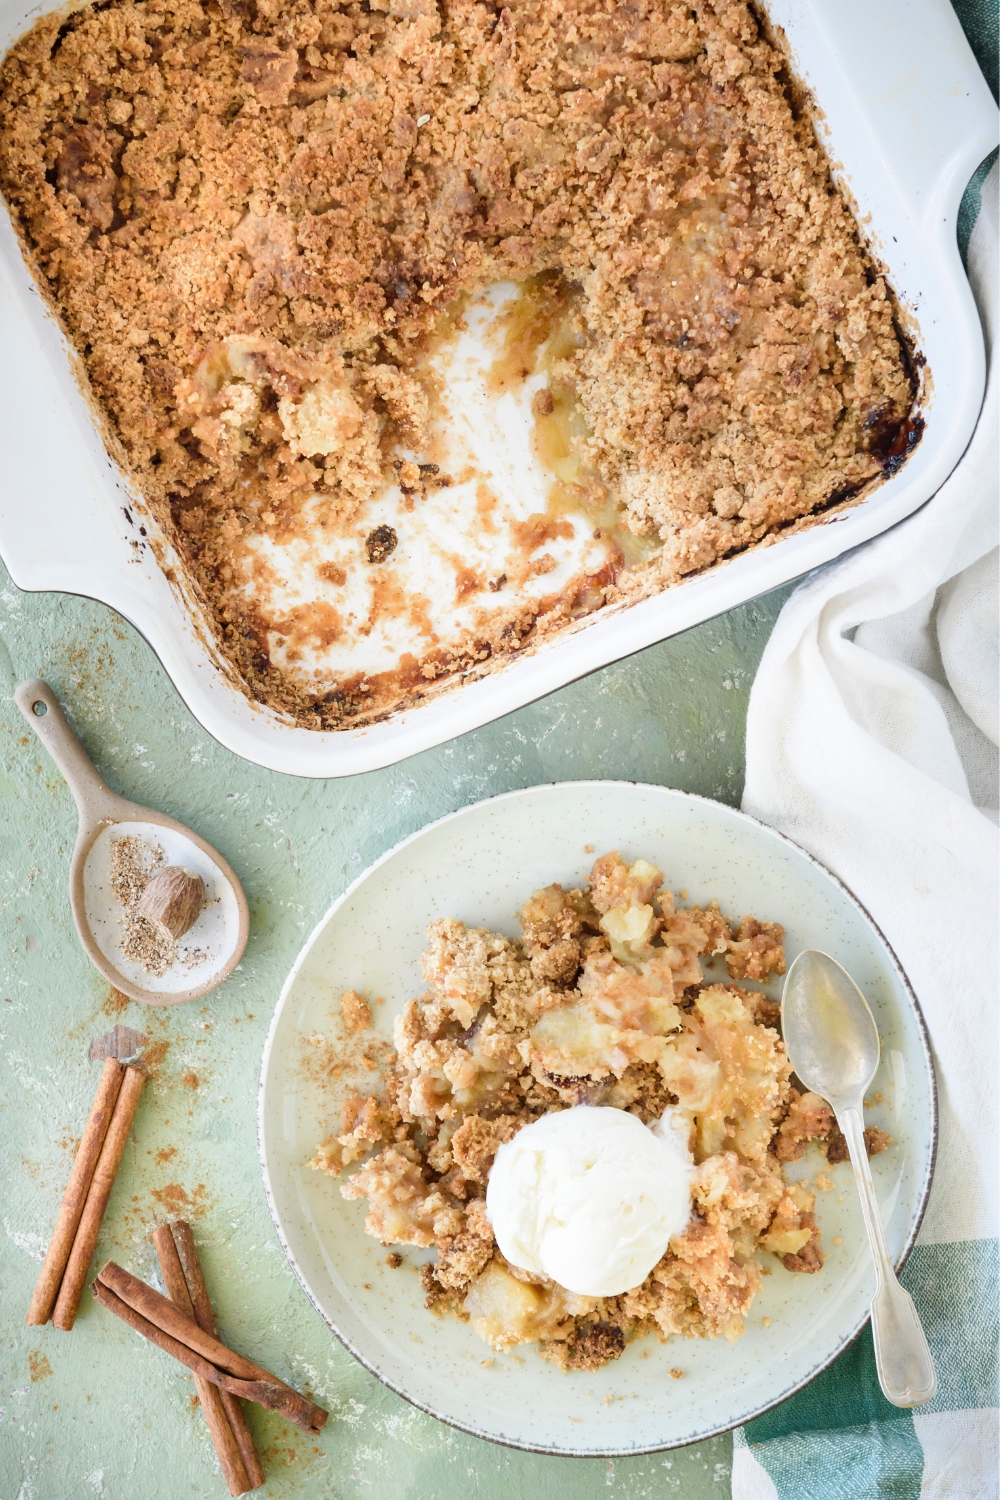 Apple crumble on a plate with a scoop of vanilla ice cream on top and a fork is also on the plate. Next to the plate is a baking dish filled with more apple crumble.